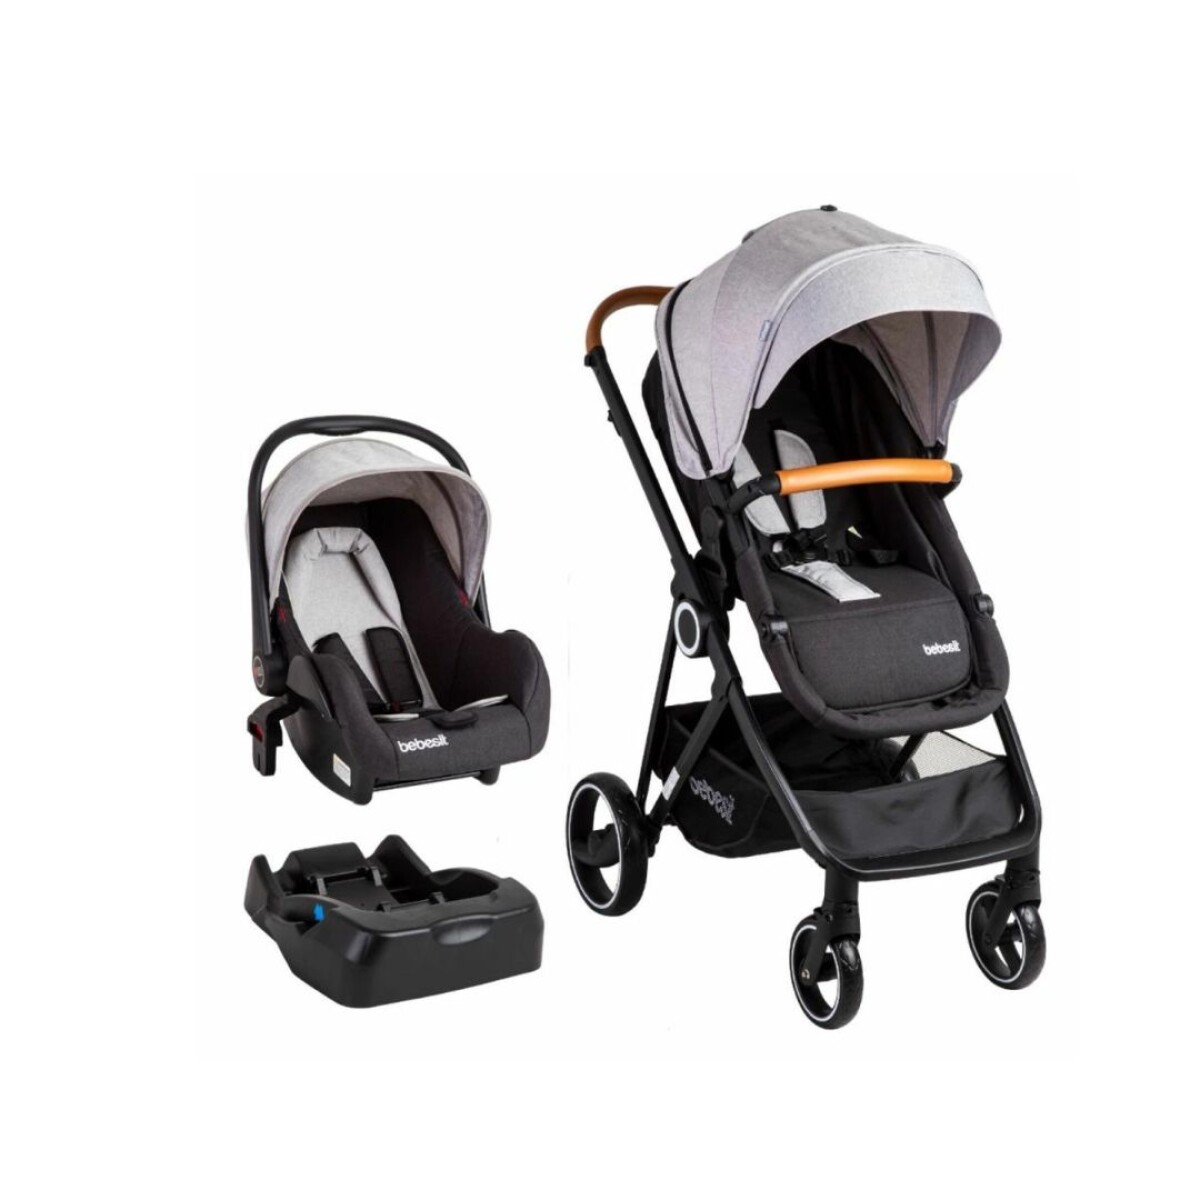 COCHE BEBESIT TRAVEL SYSTEM COSMOS - GRIS 